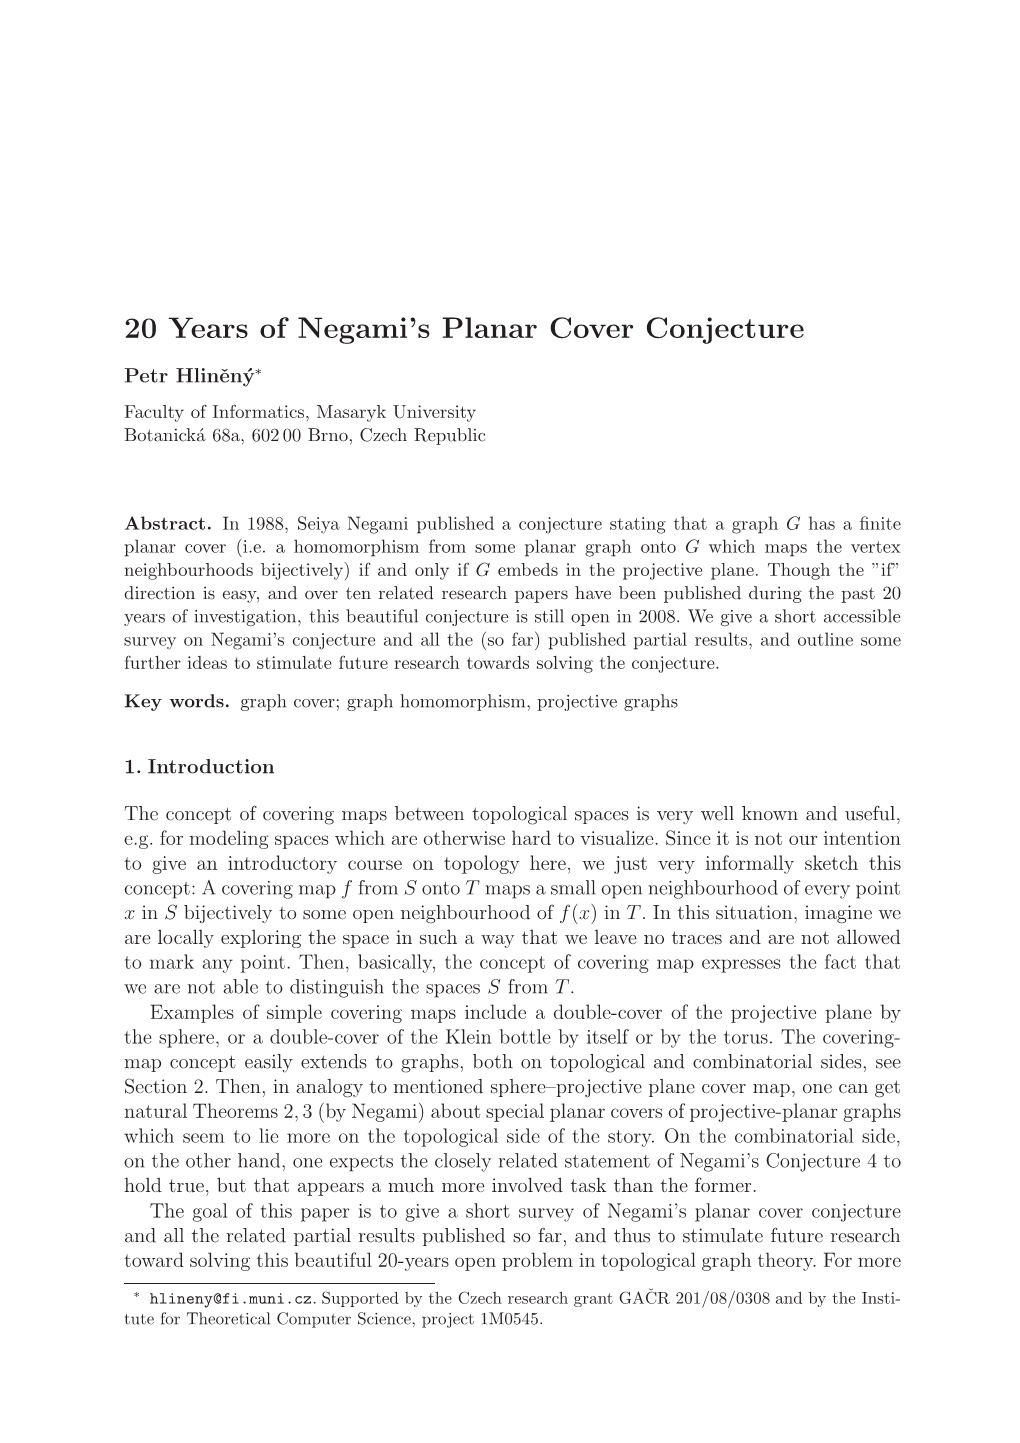 20 Years of Negami's Planar Cover Conjecture